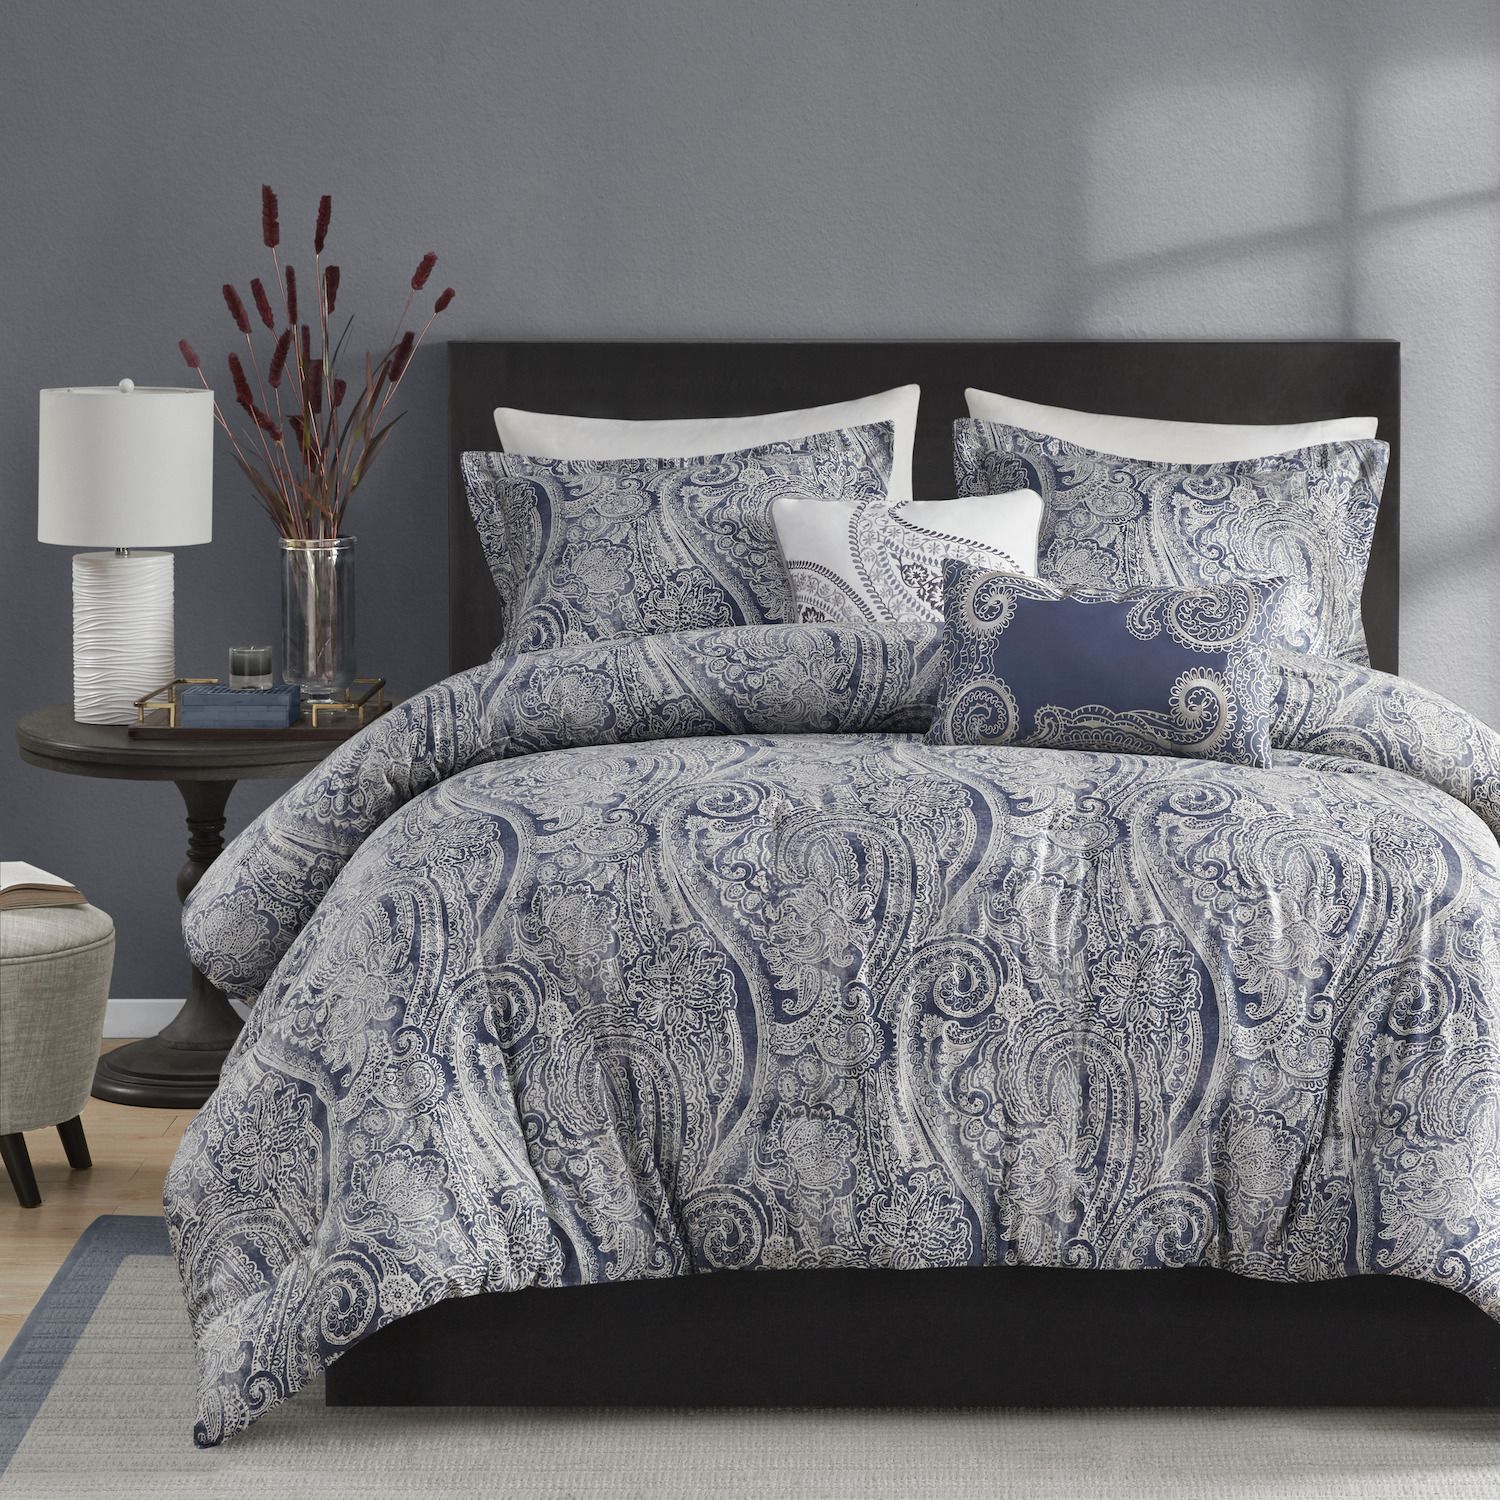 Image for Harbor House 5-piece Stella 300 Thread Count Duvet Cover Set at Kohl's.